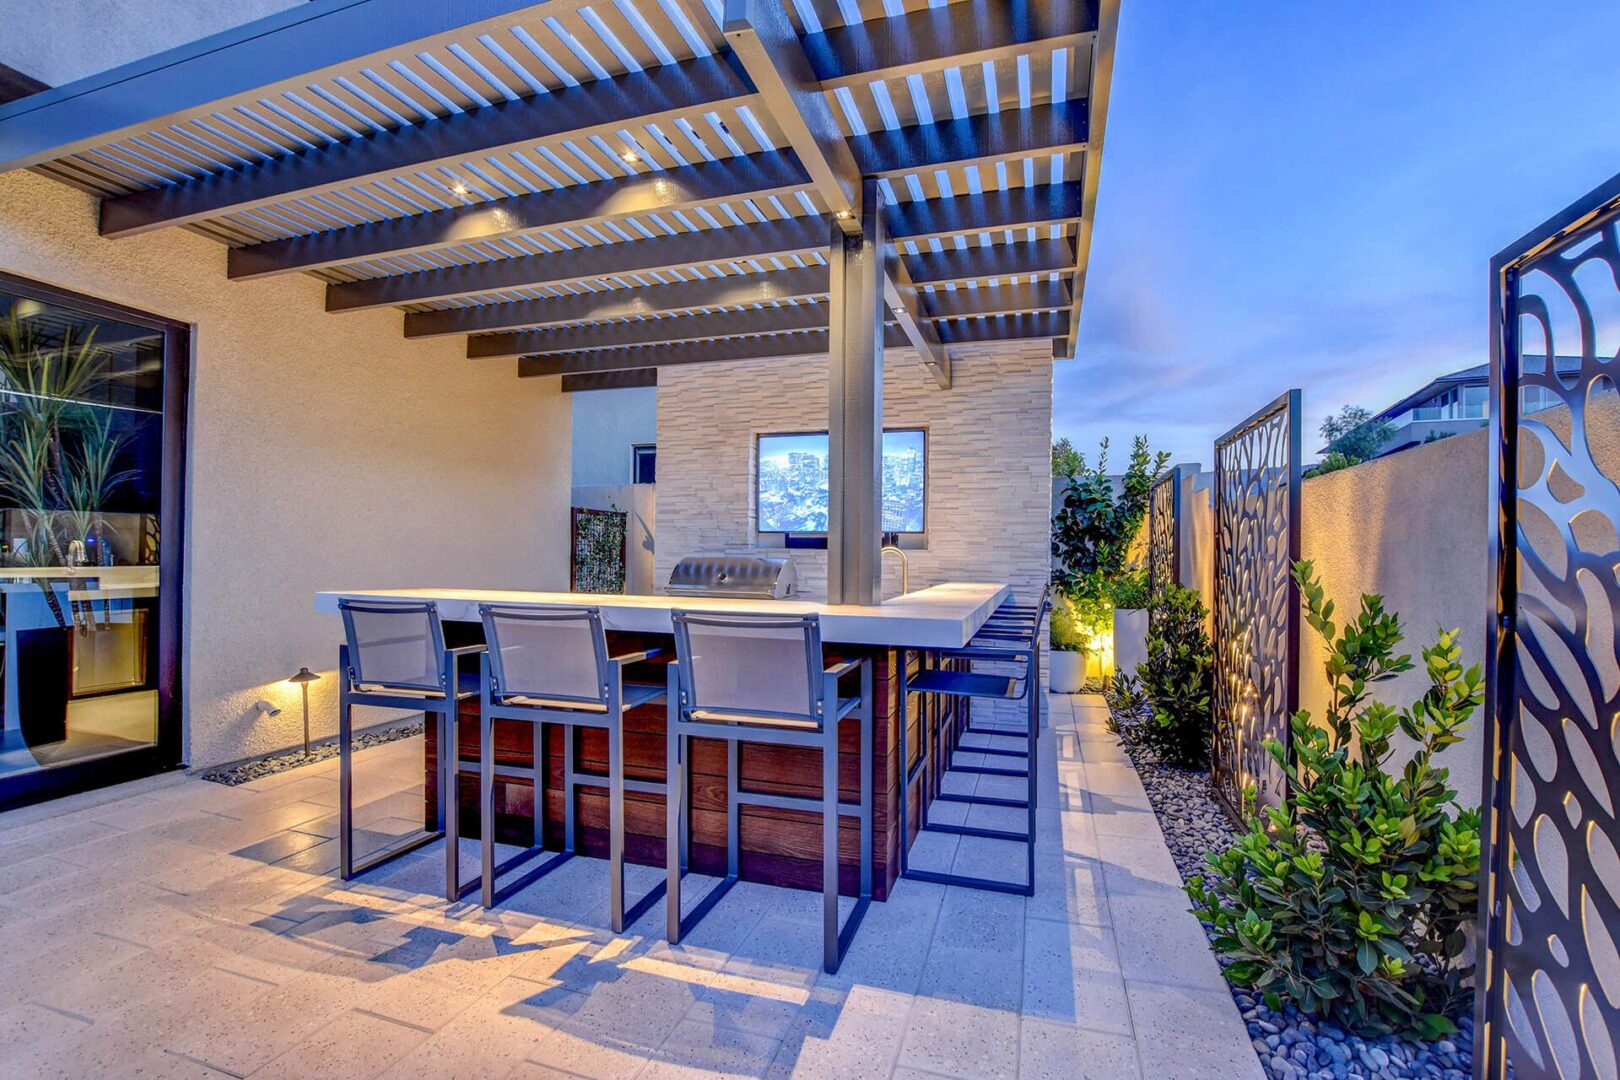 A patio with an outdoor bar and seating area.